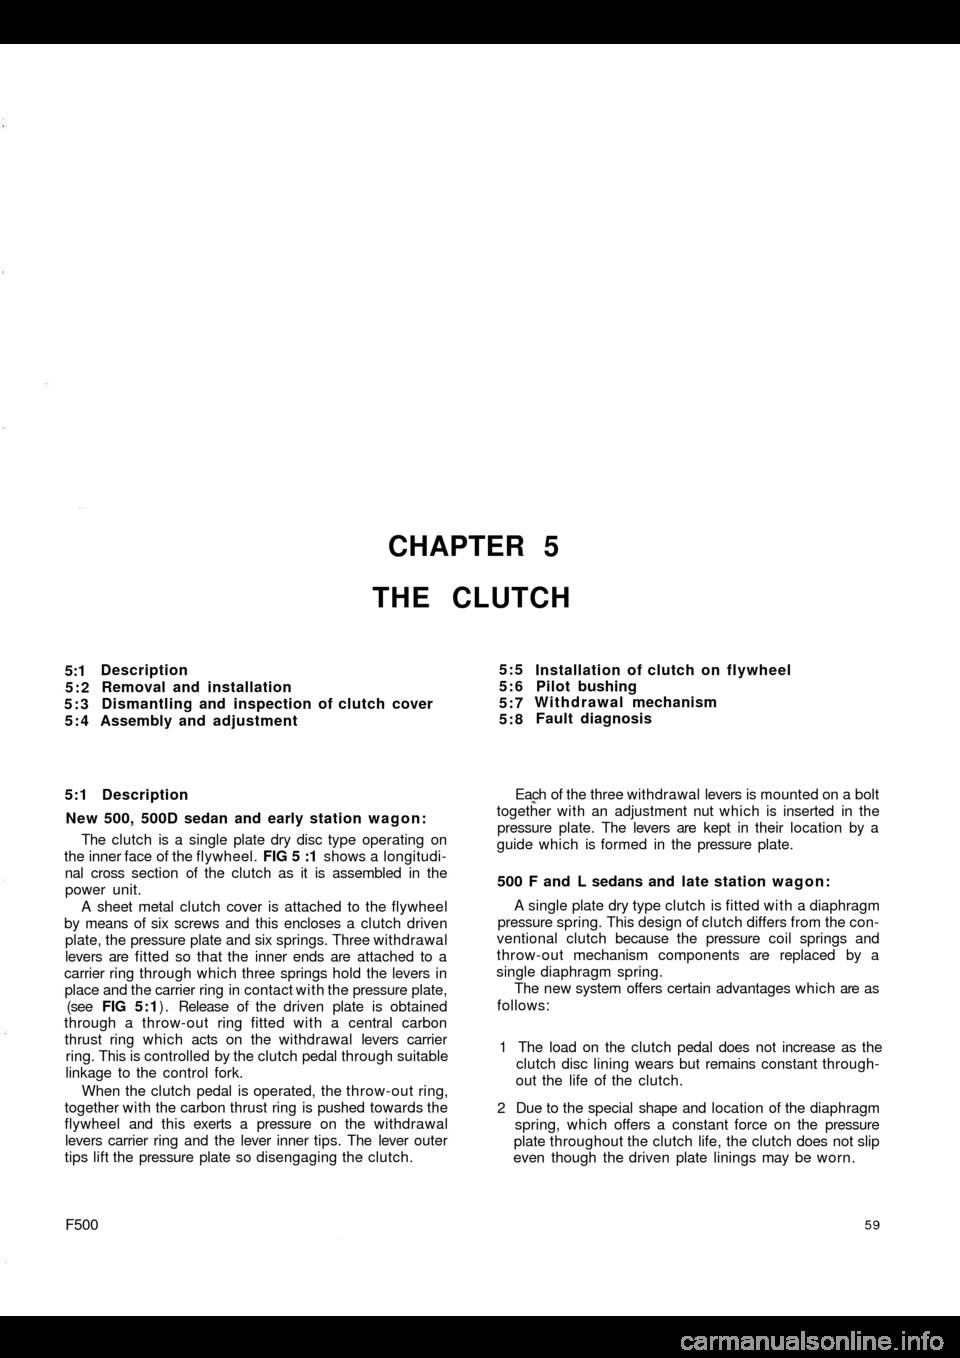 FIAT 500 1971 1.G Repair Manual CHAPTER 5
THE CLUTCH
5:1
5:2
5:3
5:4Description
Removal and installation
Dismantling and inspection of clutch cover
Assembly and adjustment
5:1 Description
New 500, 500D sedan and early station wagon: